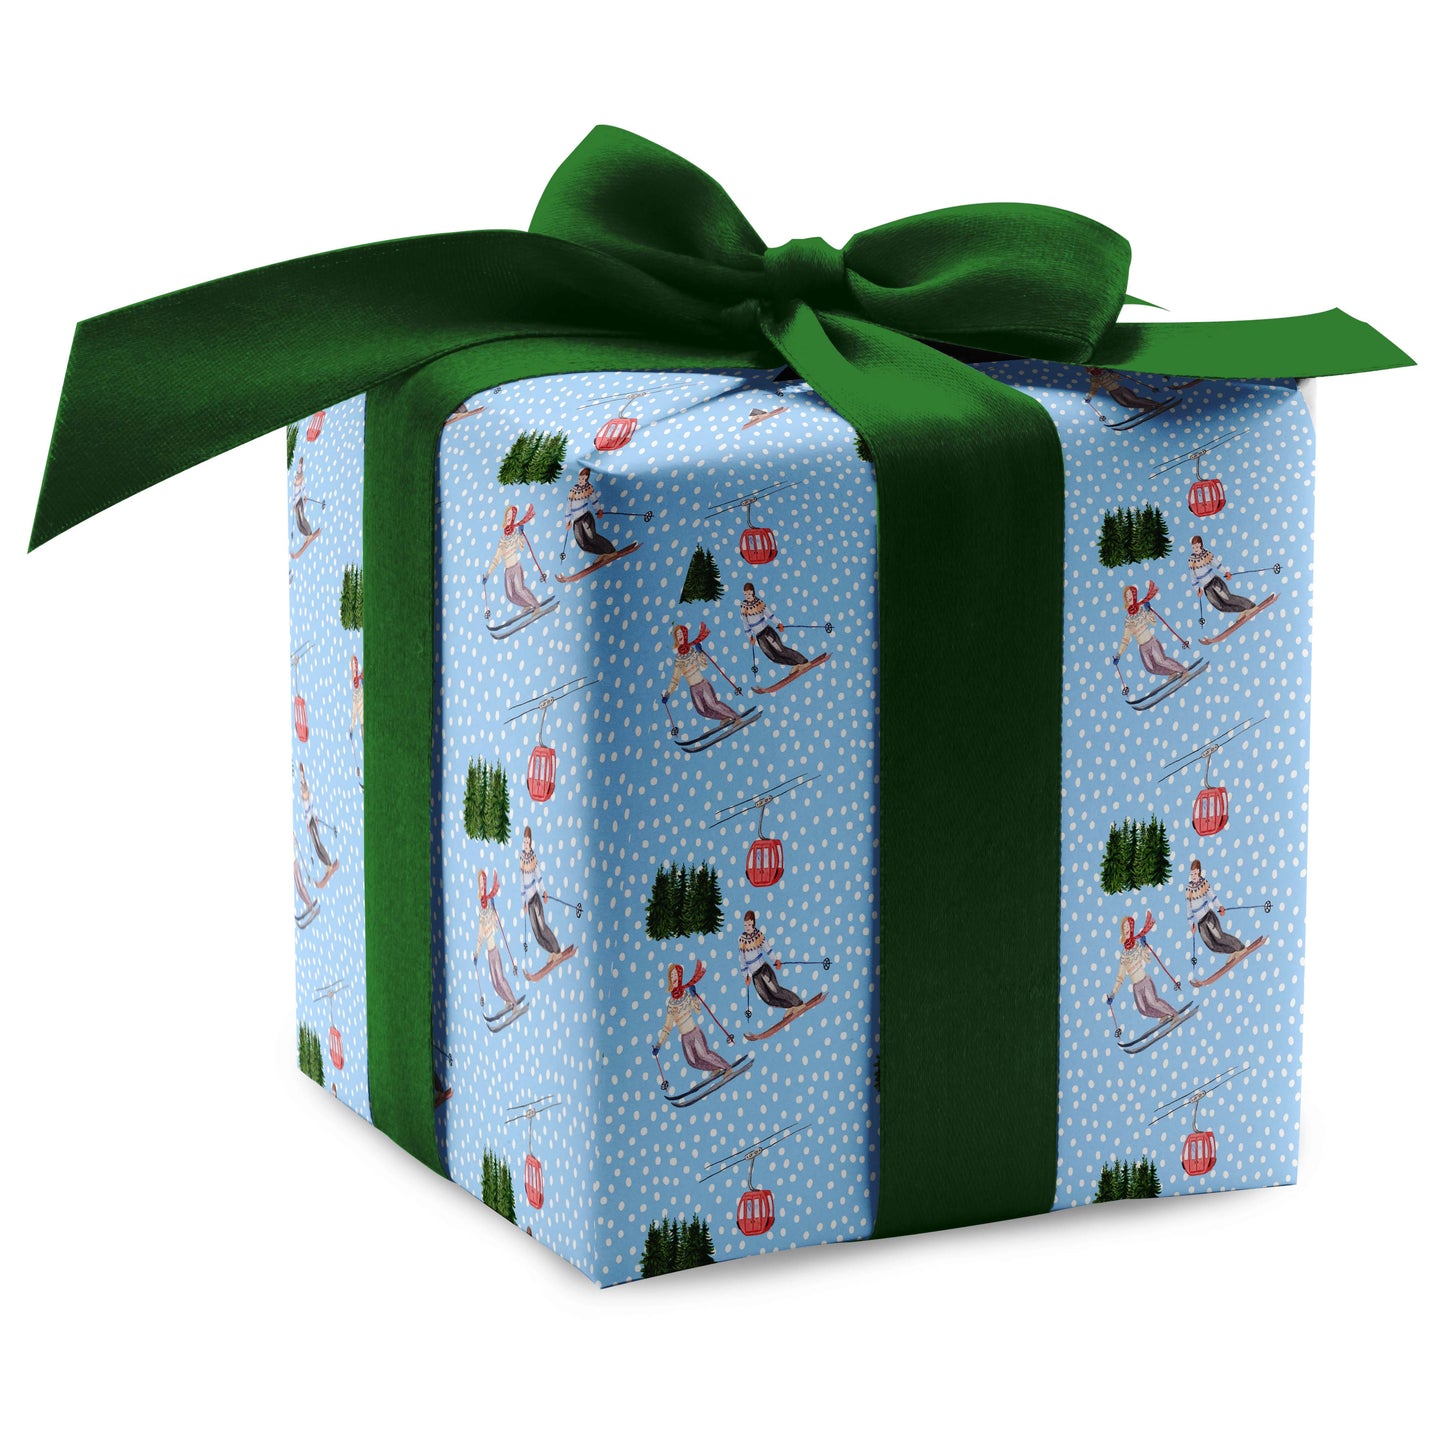 Ski You Later Luxury Gift Wrap - Available in 2 Colors